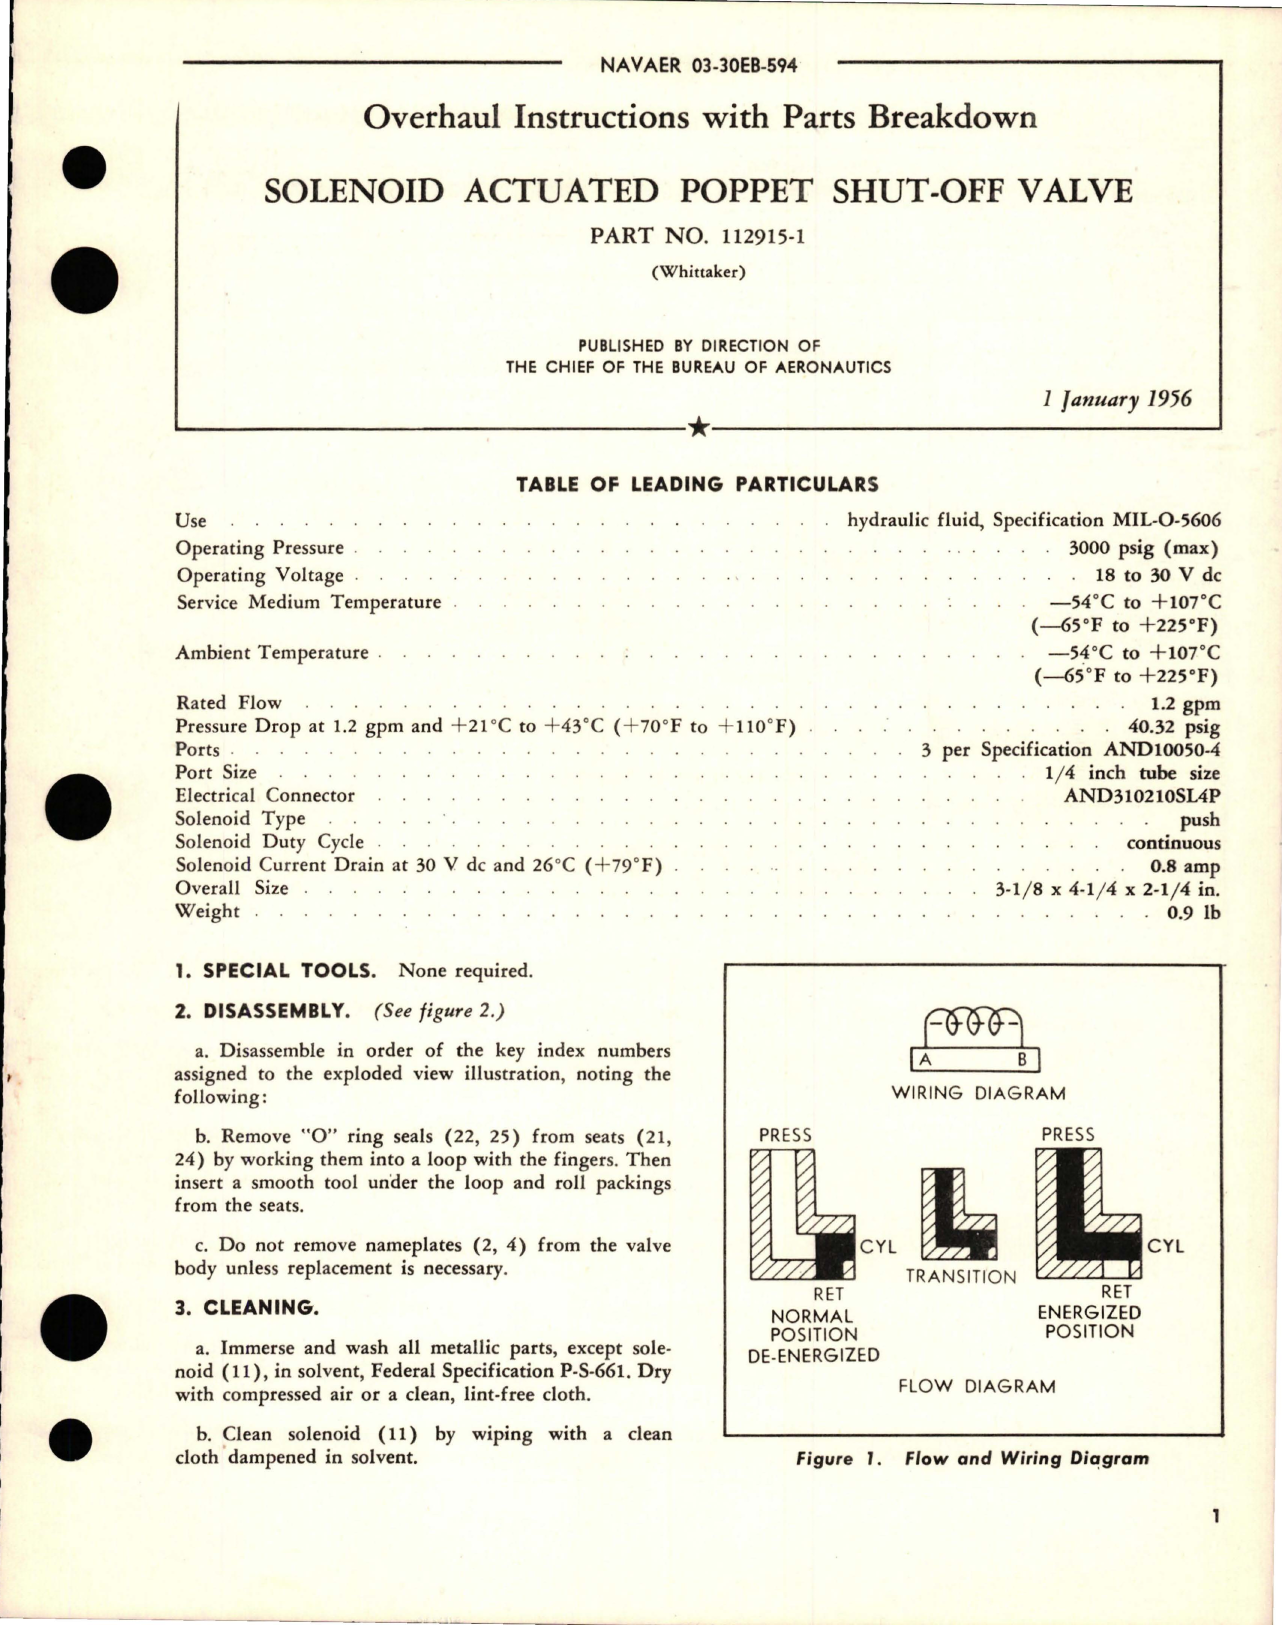 Sample page 1 from AirCorps Library document: Overhaul Instructions with Parts Breakdown for Solenoid Actuated Poppet Shut-Off Valve - Part 112915-1